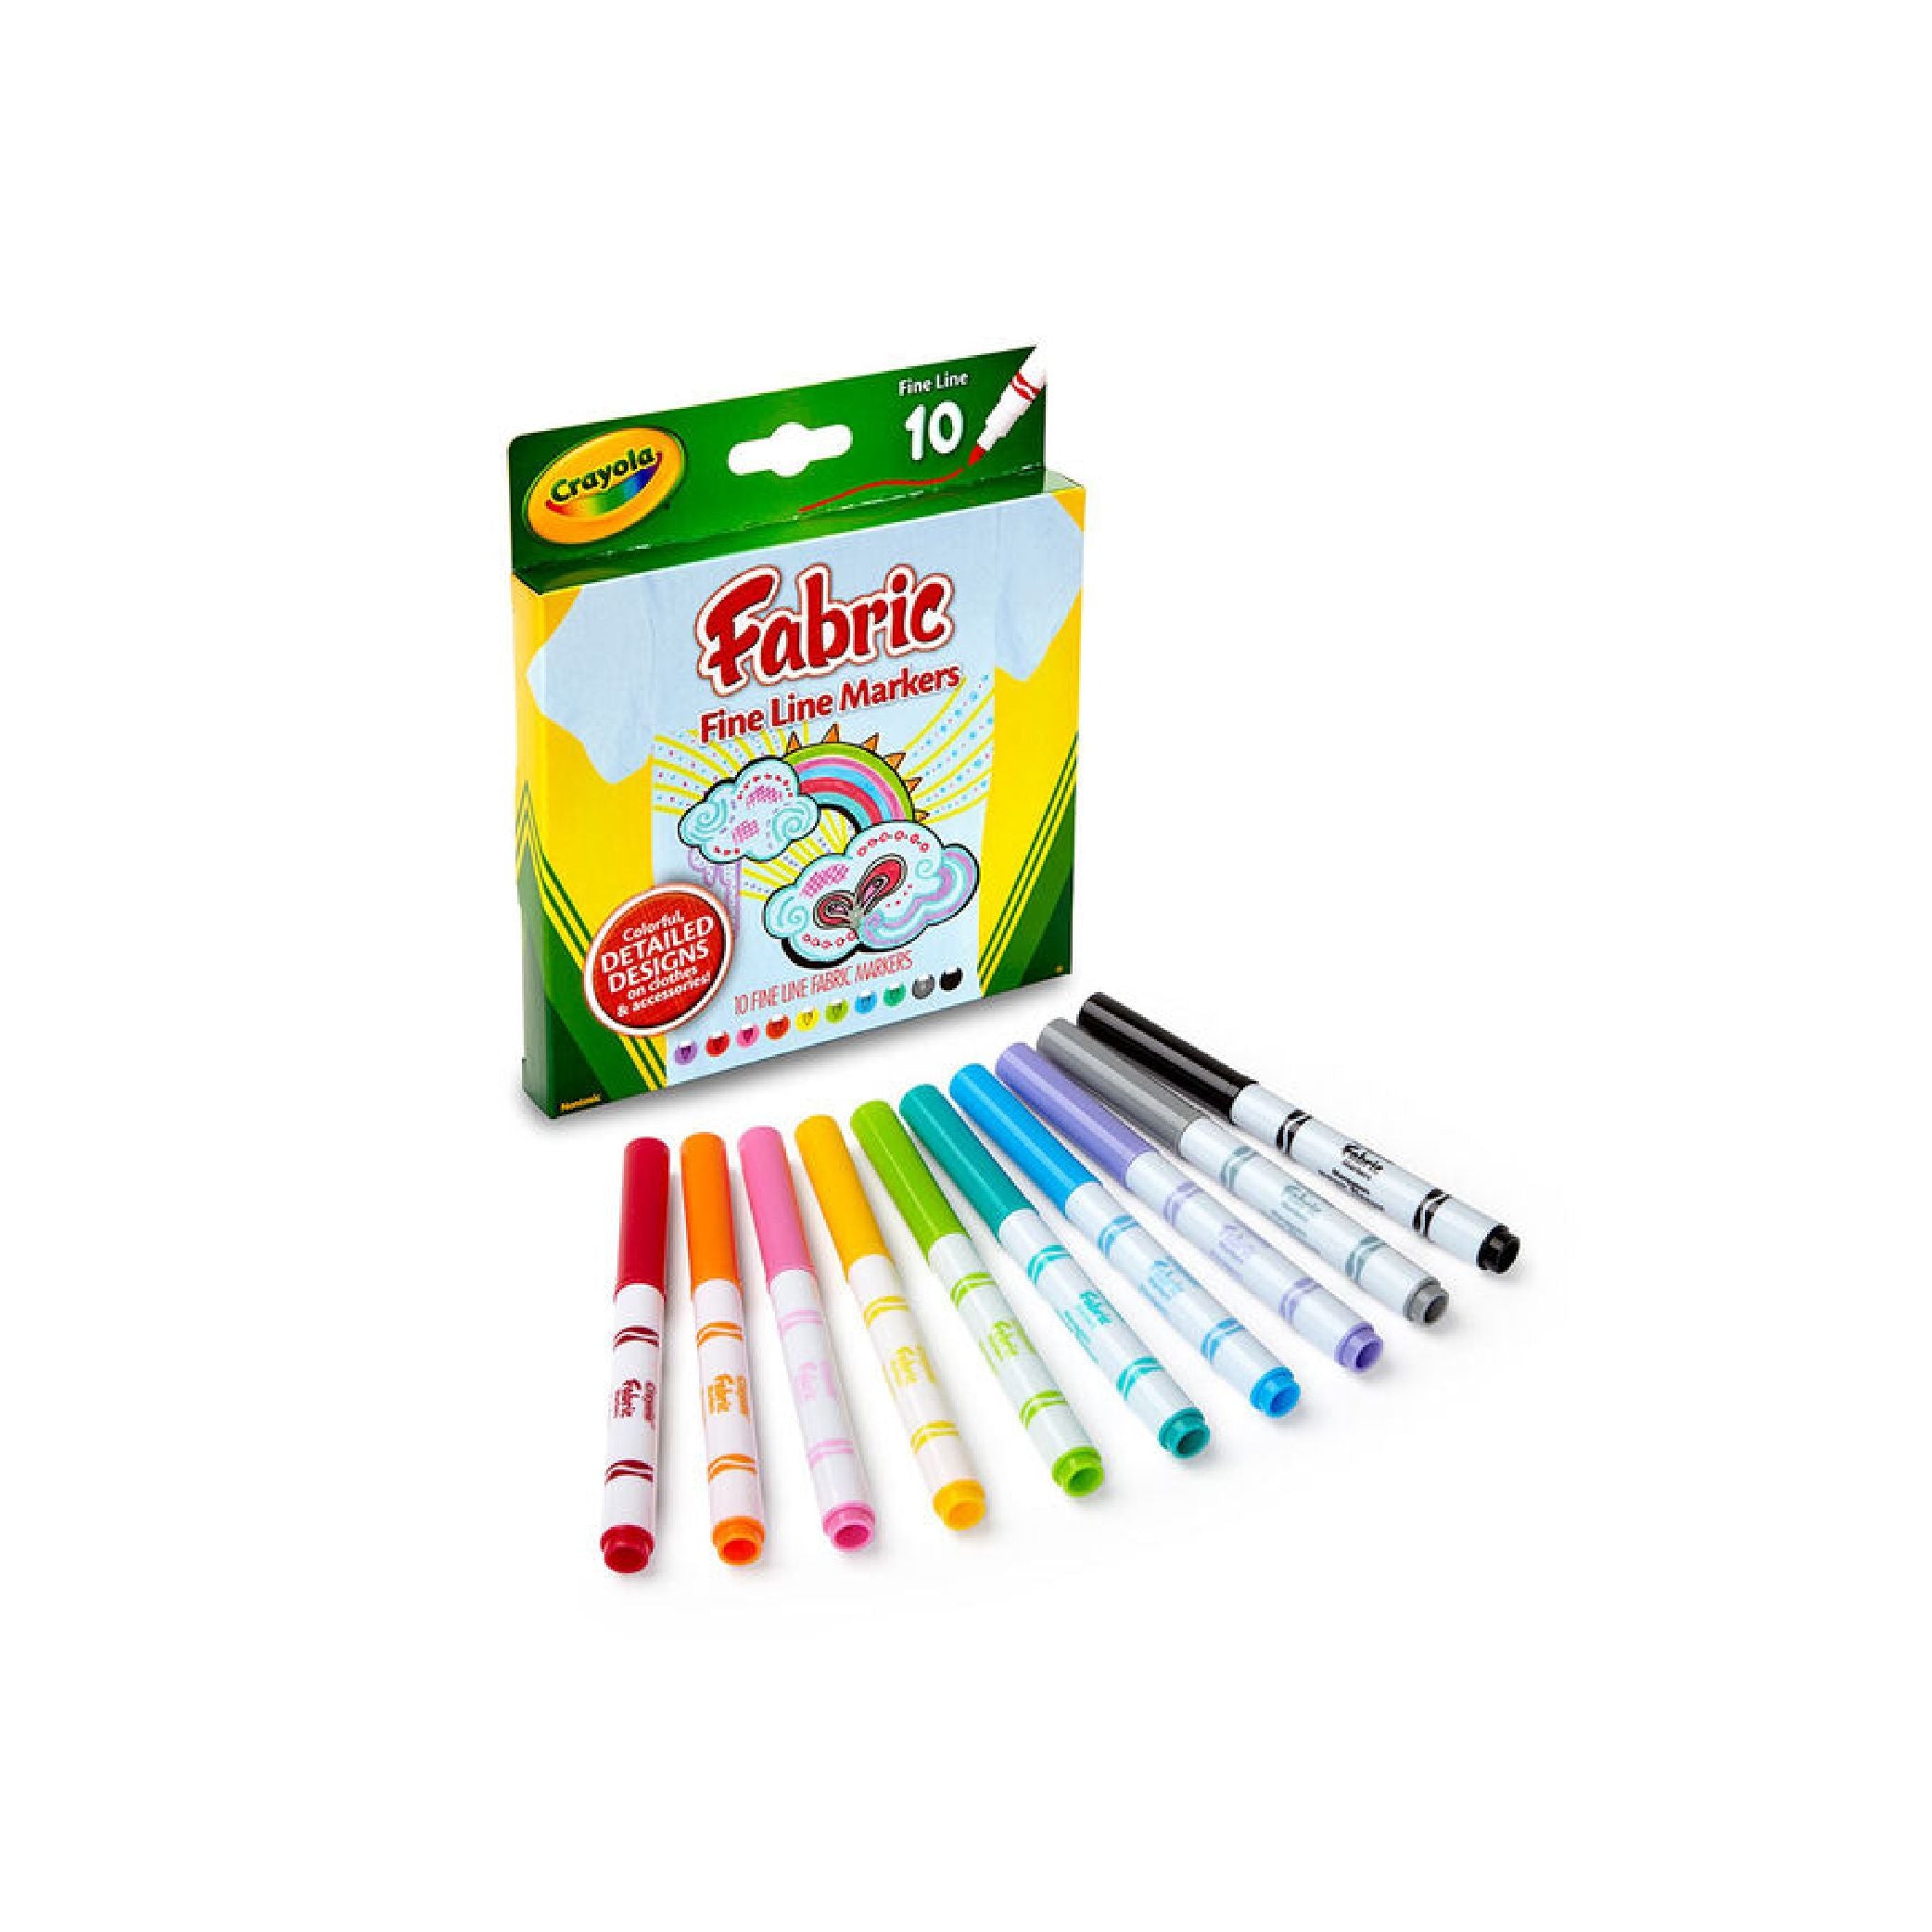 CRAYOLA Fabric Fine Line Markers 10ct Default Title